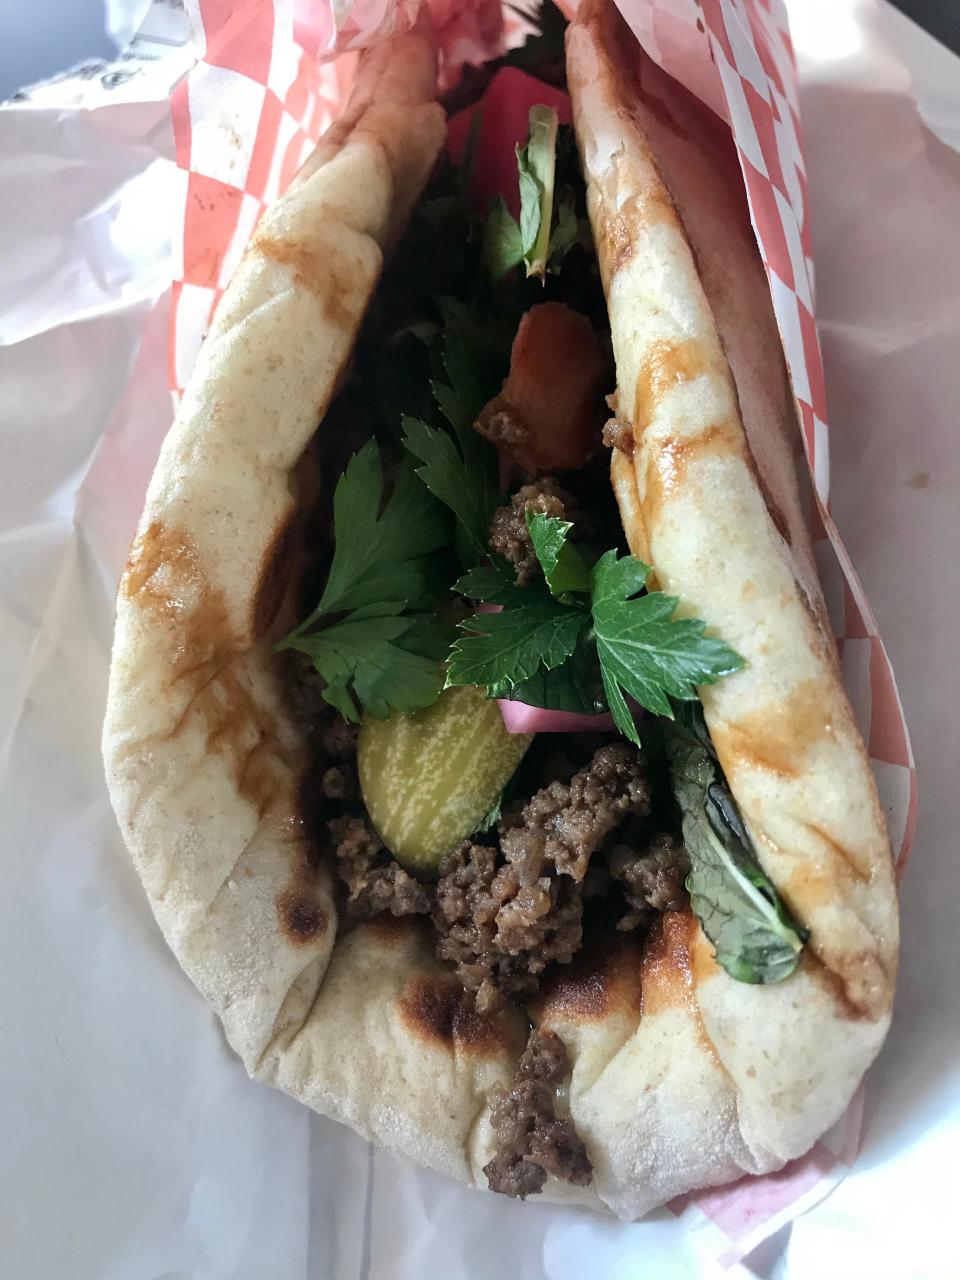 Middle East Side's spiced beef flatbread sandwich is made on the downtown pop-up's own bread.